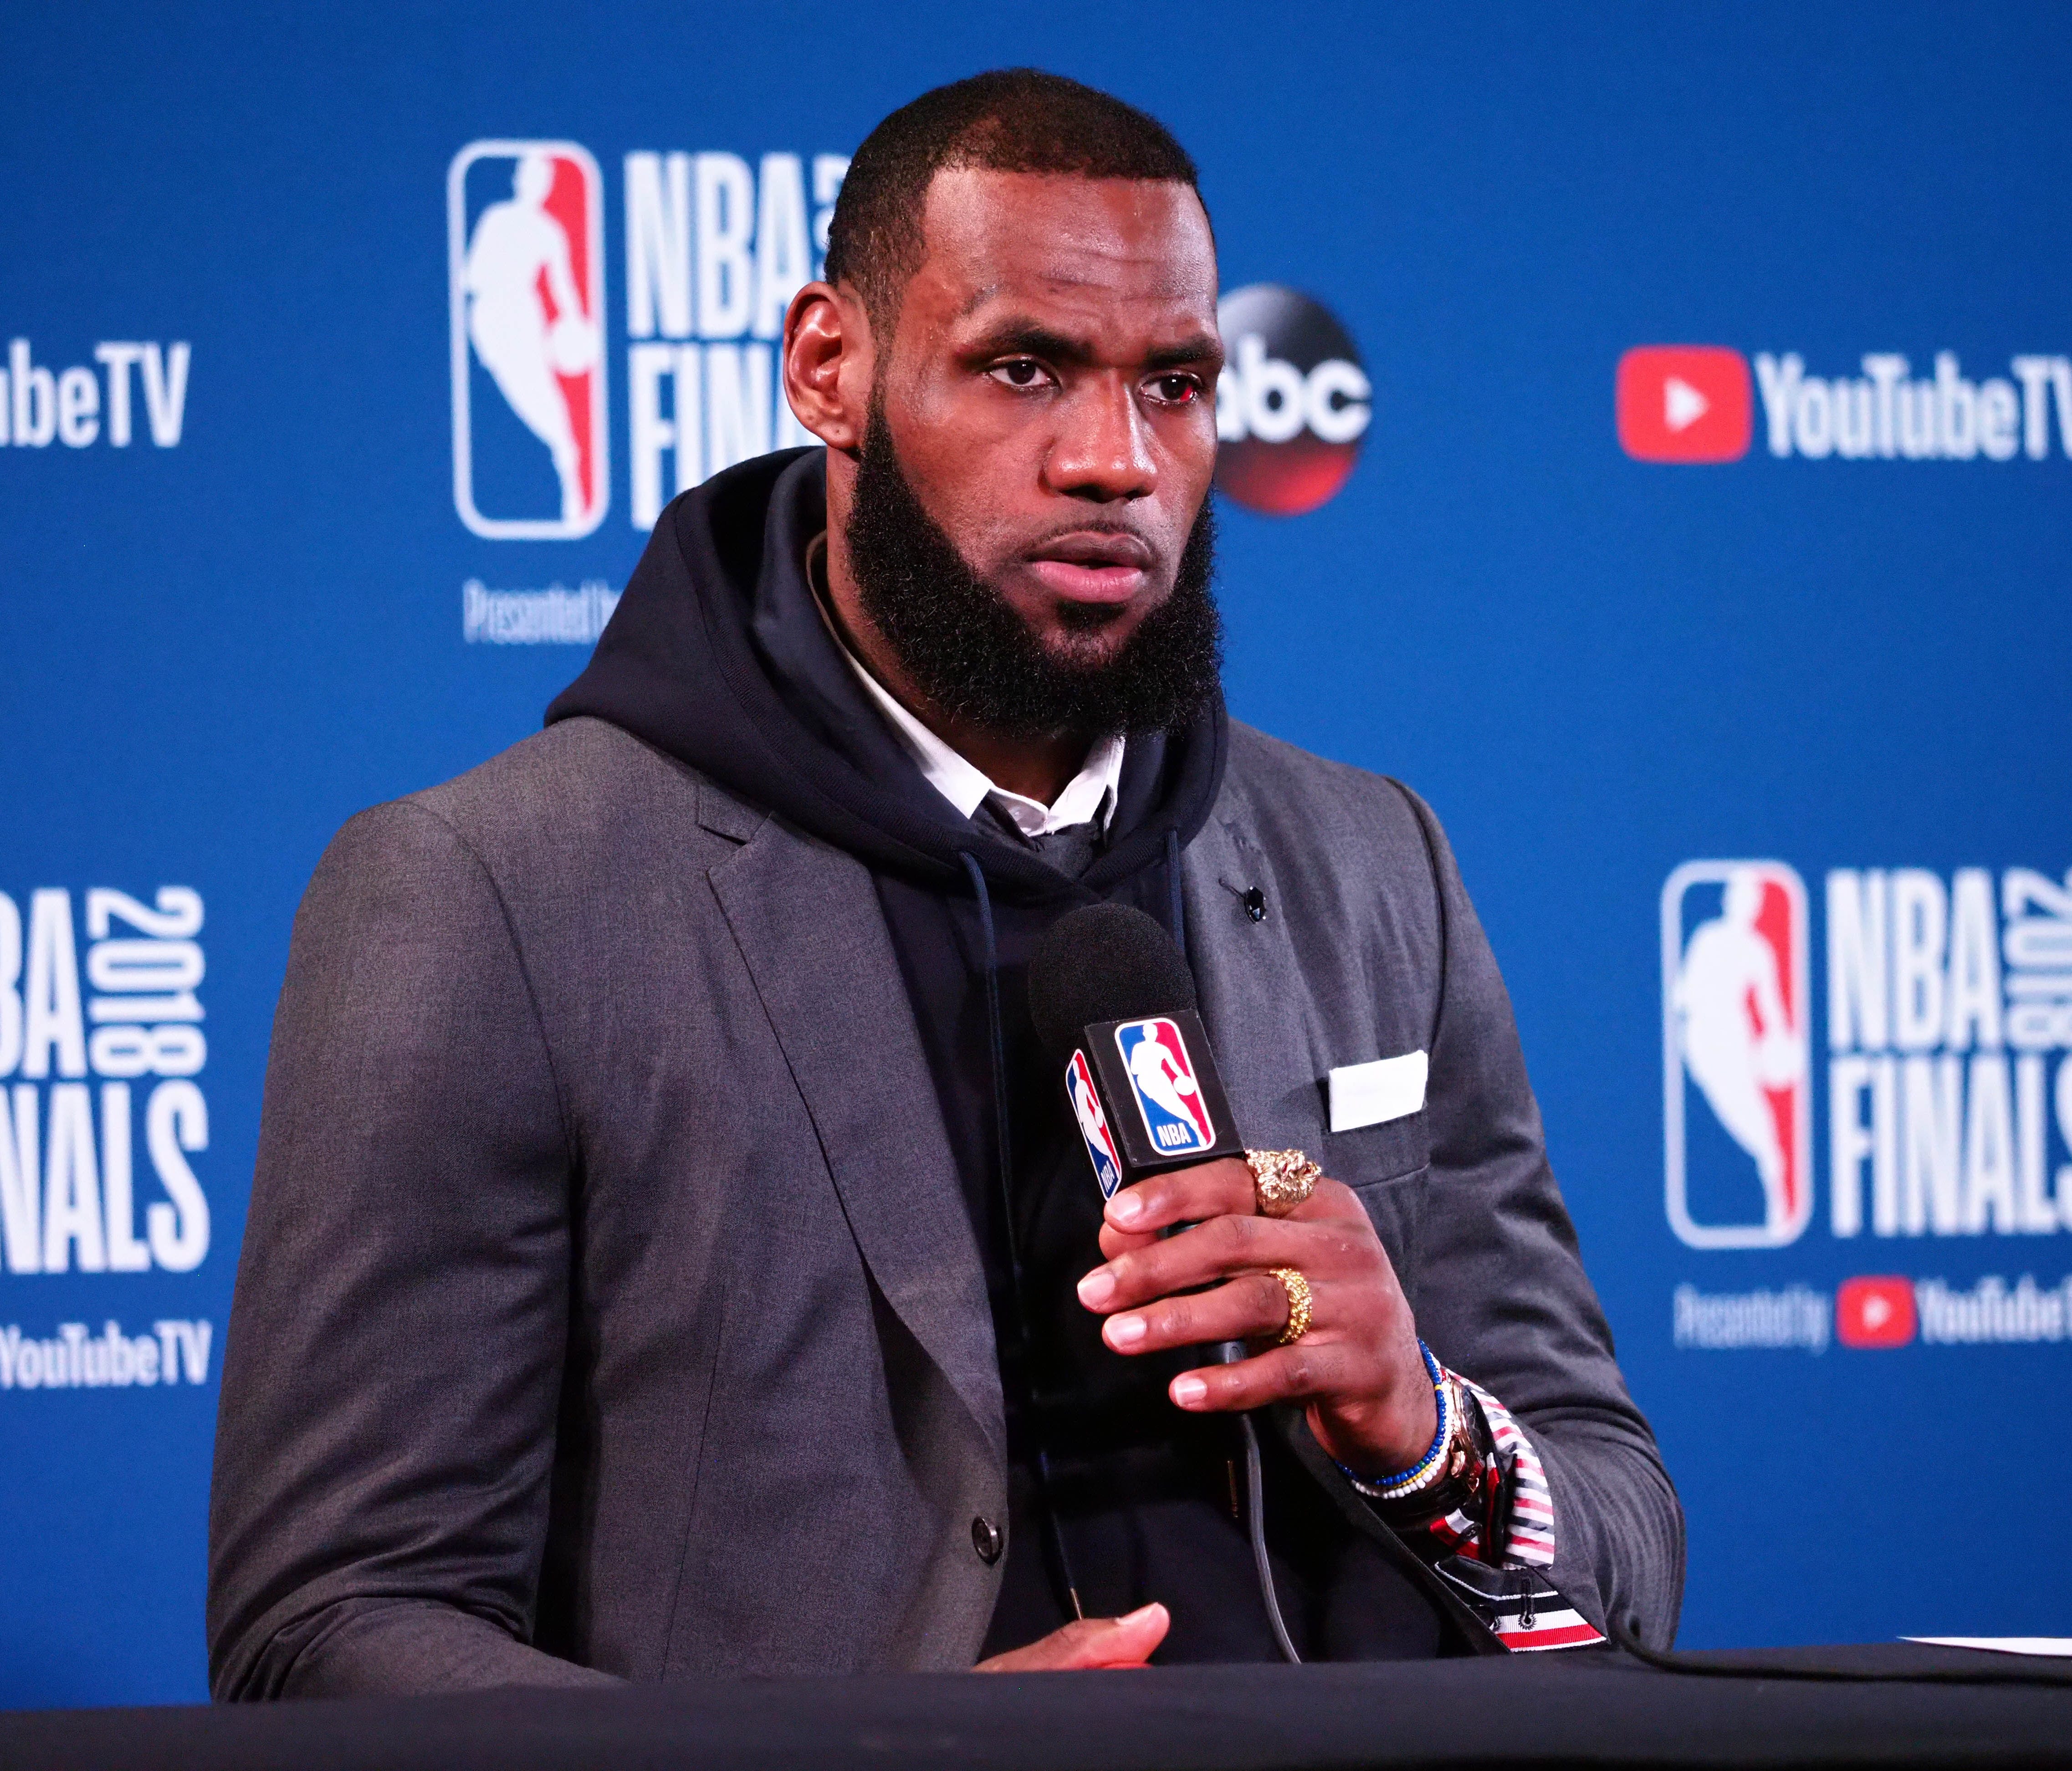 Cleveland Cavaliers forward LeBron James (23) speaks to media following game two of the 2018 NBA Finals at Oracle Arena.